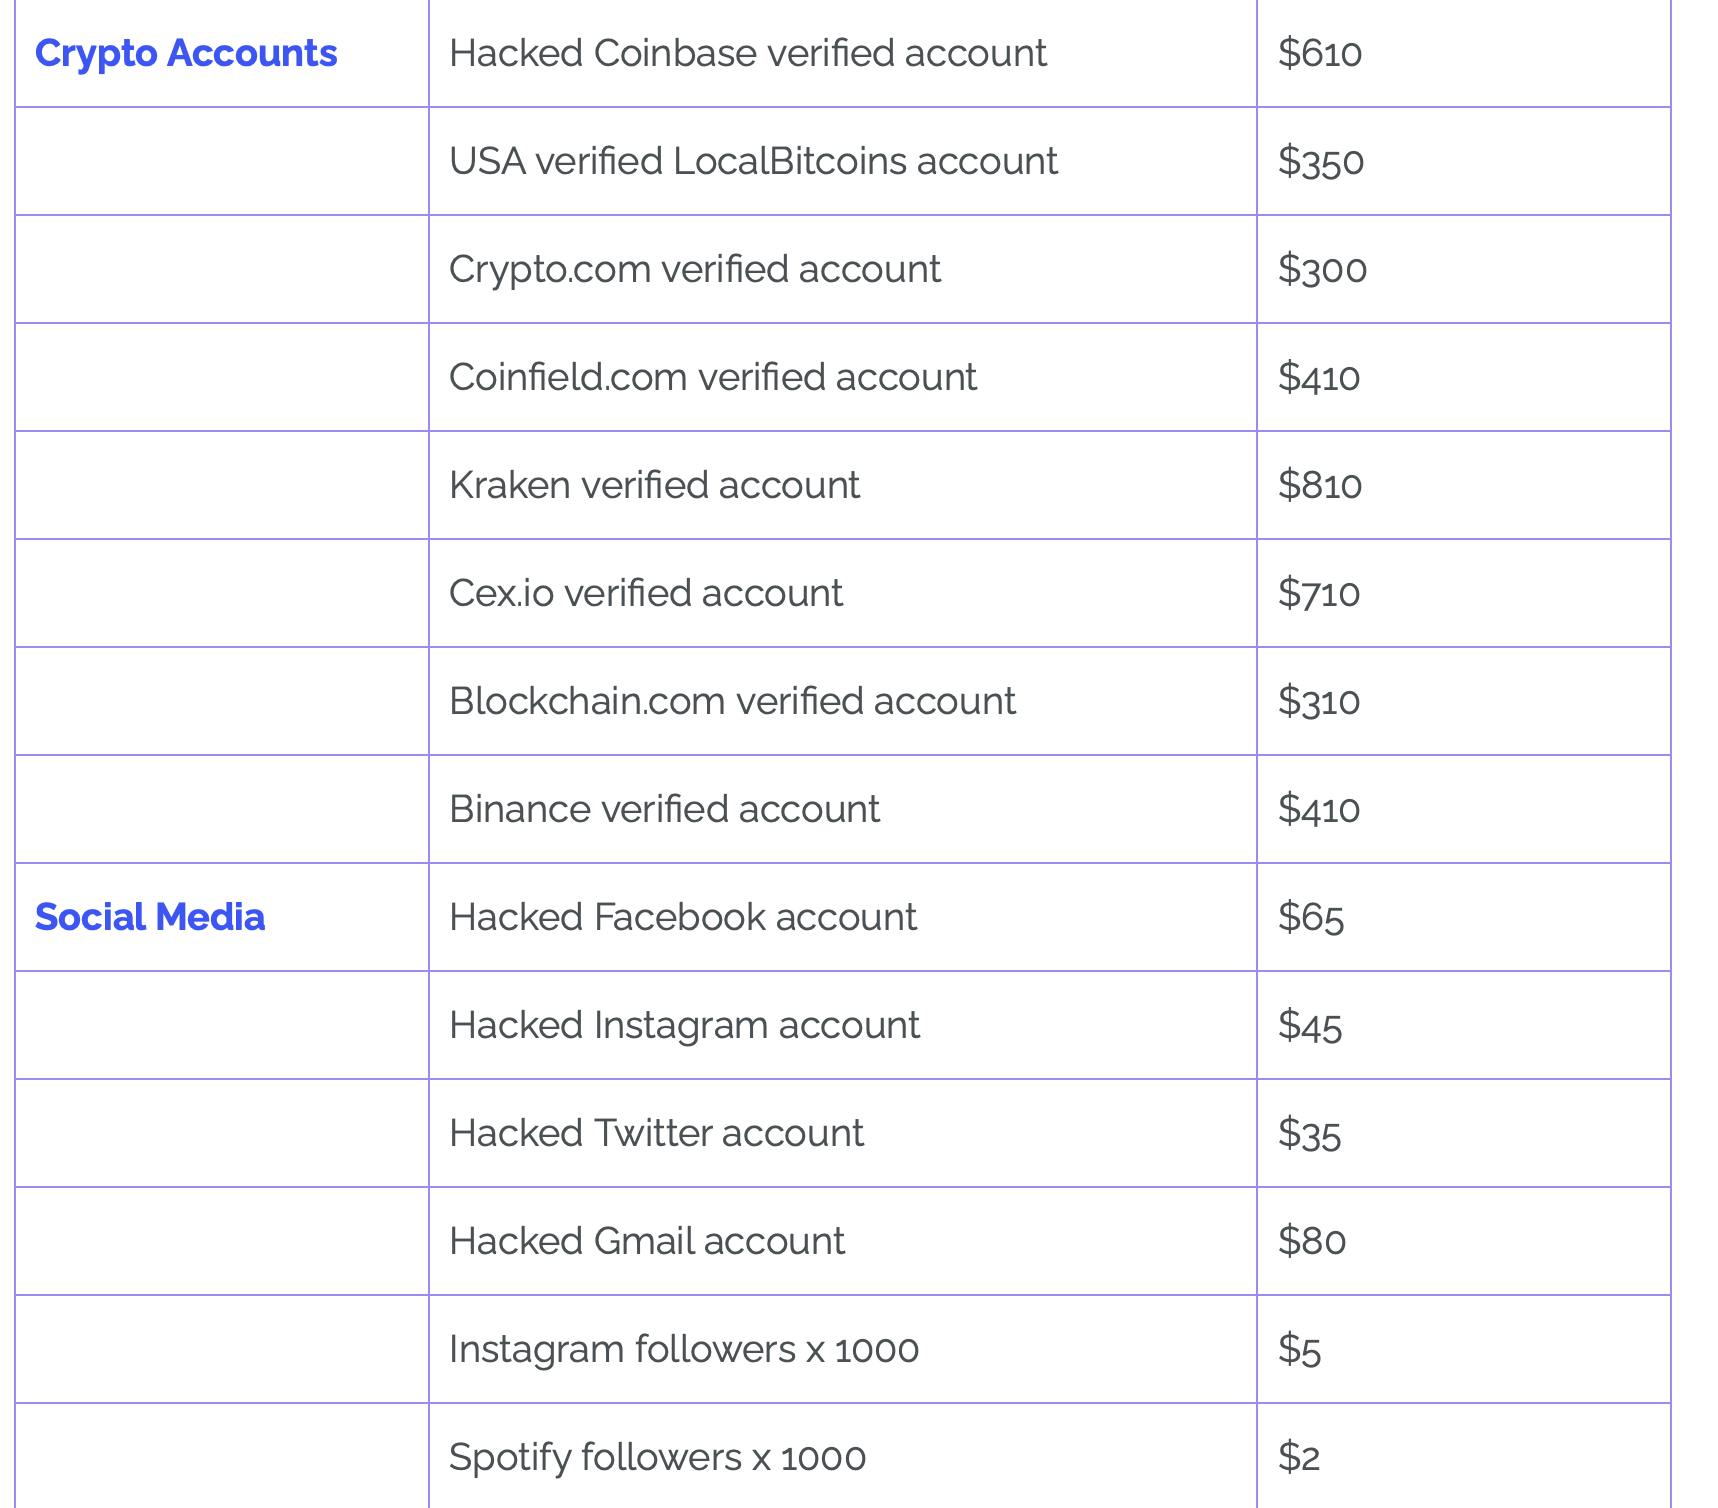 Crypto accounts, verified and hacked for sale, along with Social Media hacked account for sale